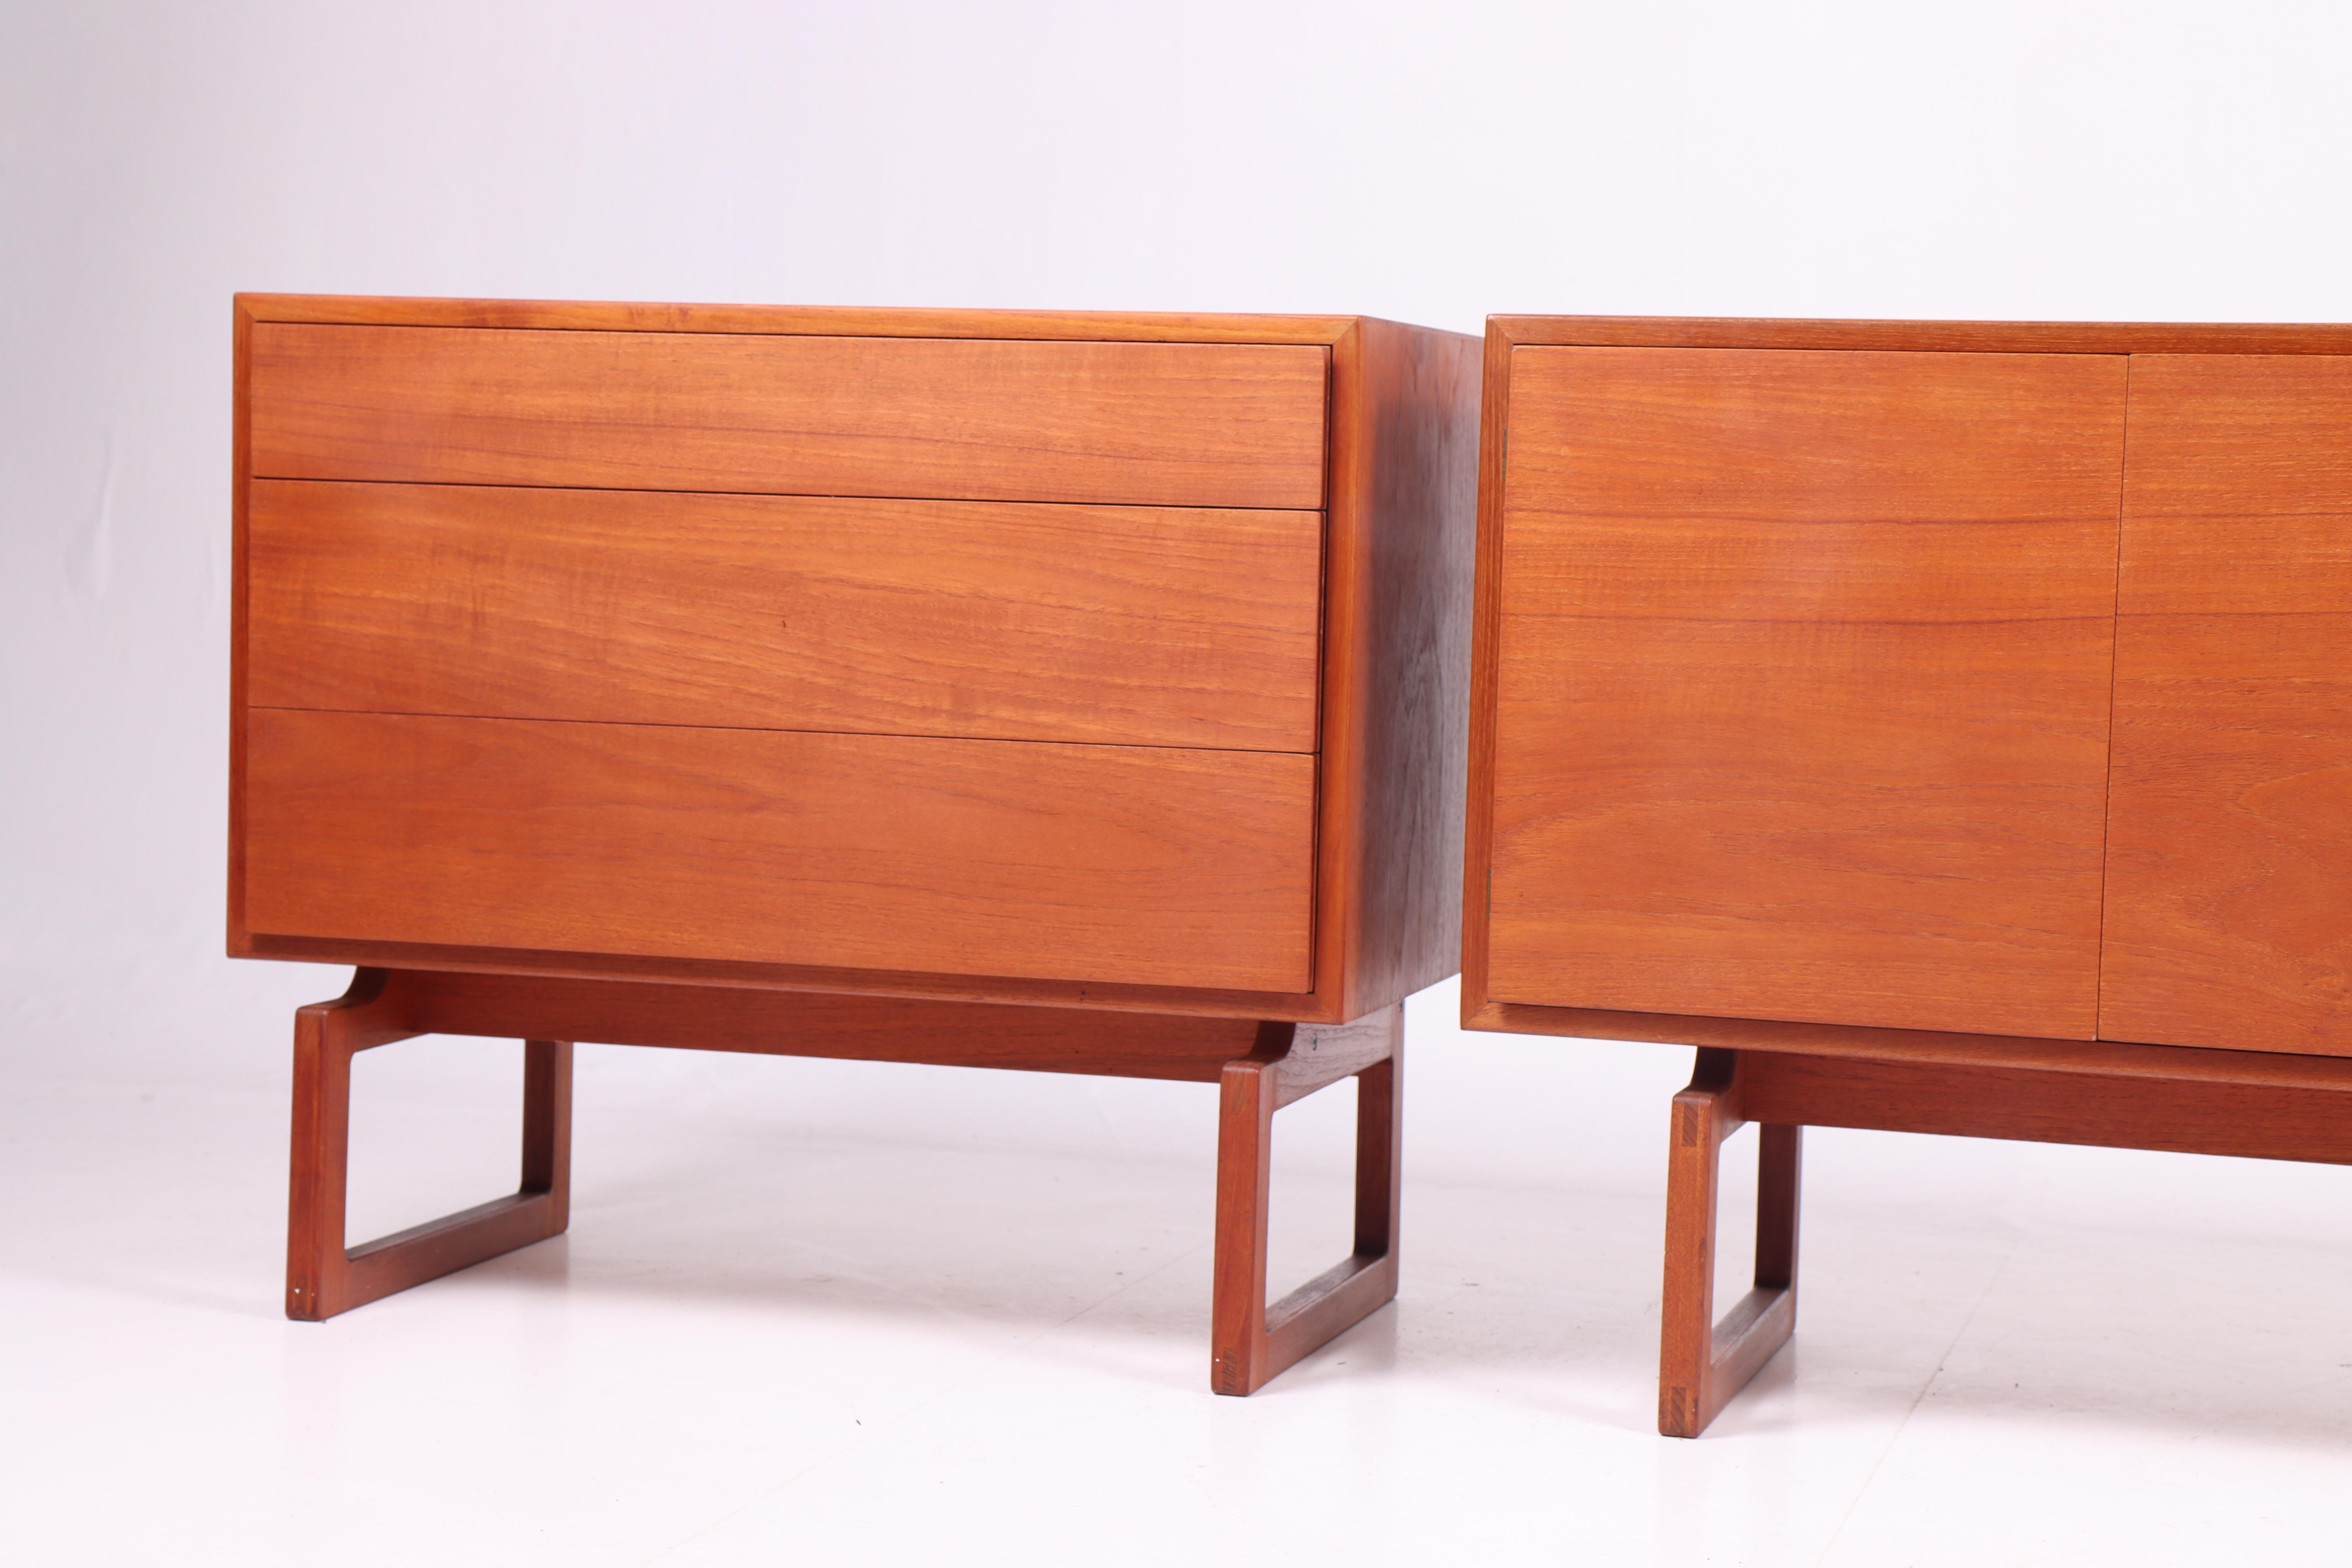 Great looking sideboard and commode in teak, designed by Arne Hovmand Olsen for Mogens Kold furniture. Great original condition.

Commode: 80x46x71 cm 
Sideboard: 160x46x71 cm